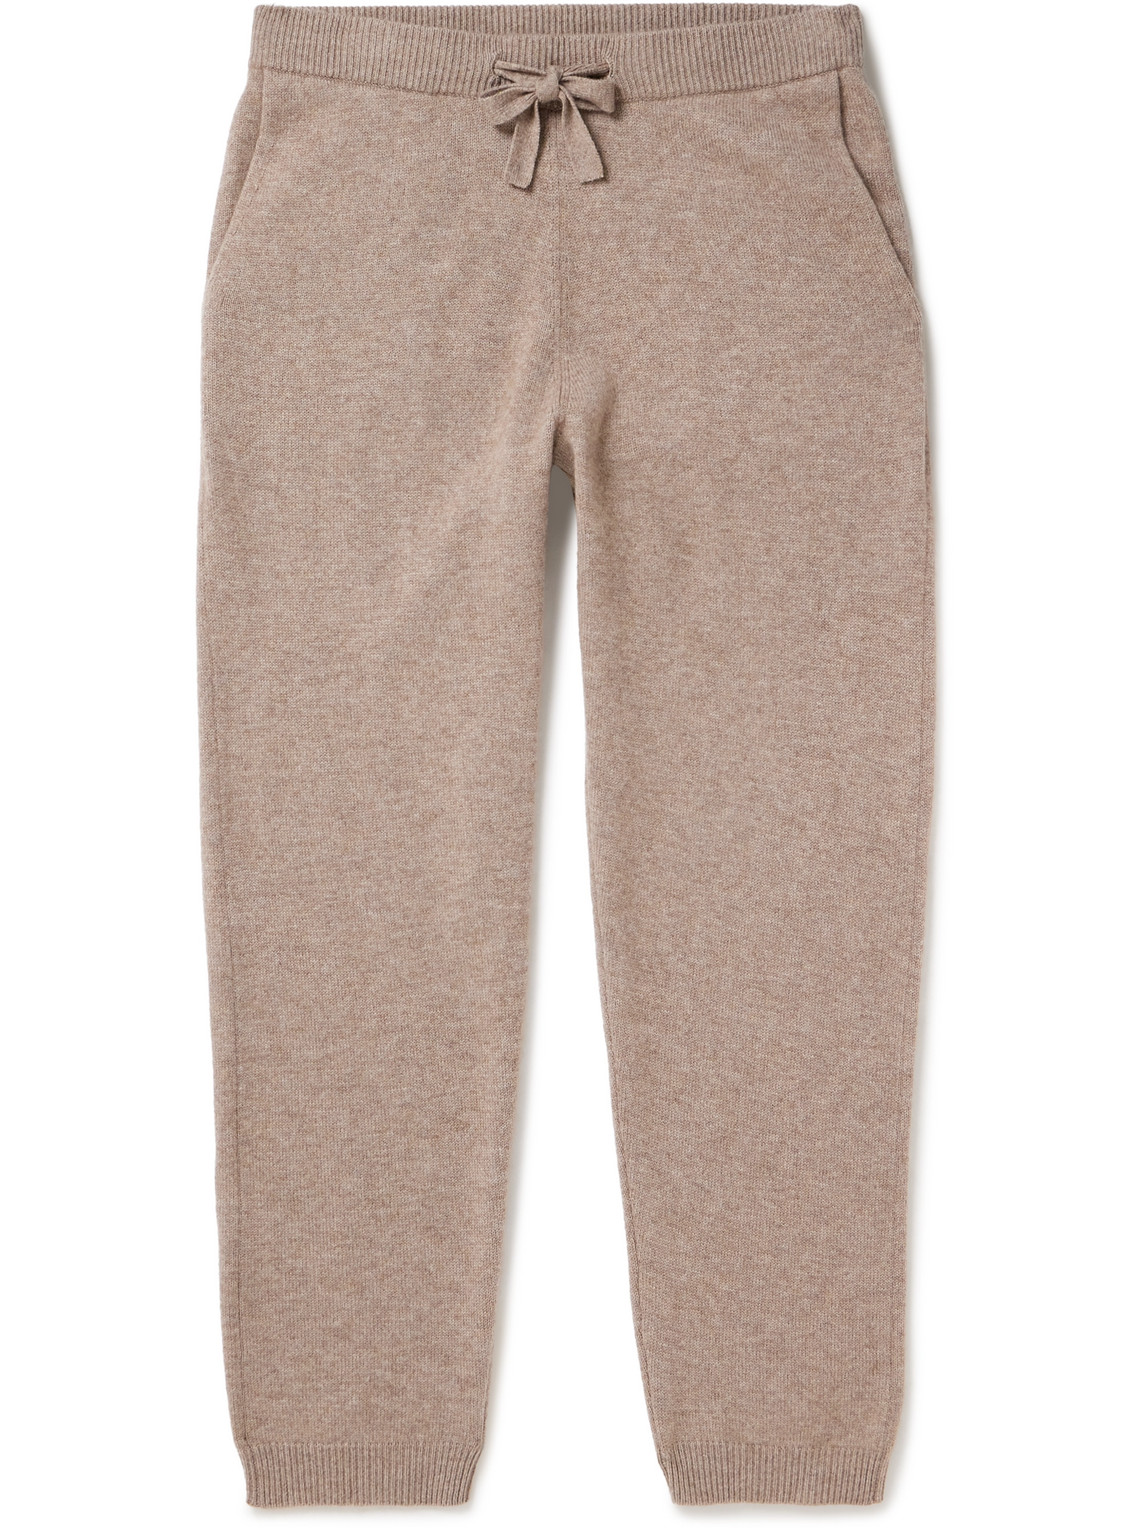 Nn07 6610 Straight-leg Wool And Cashmere-blend Sweatpants In Neutrals